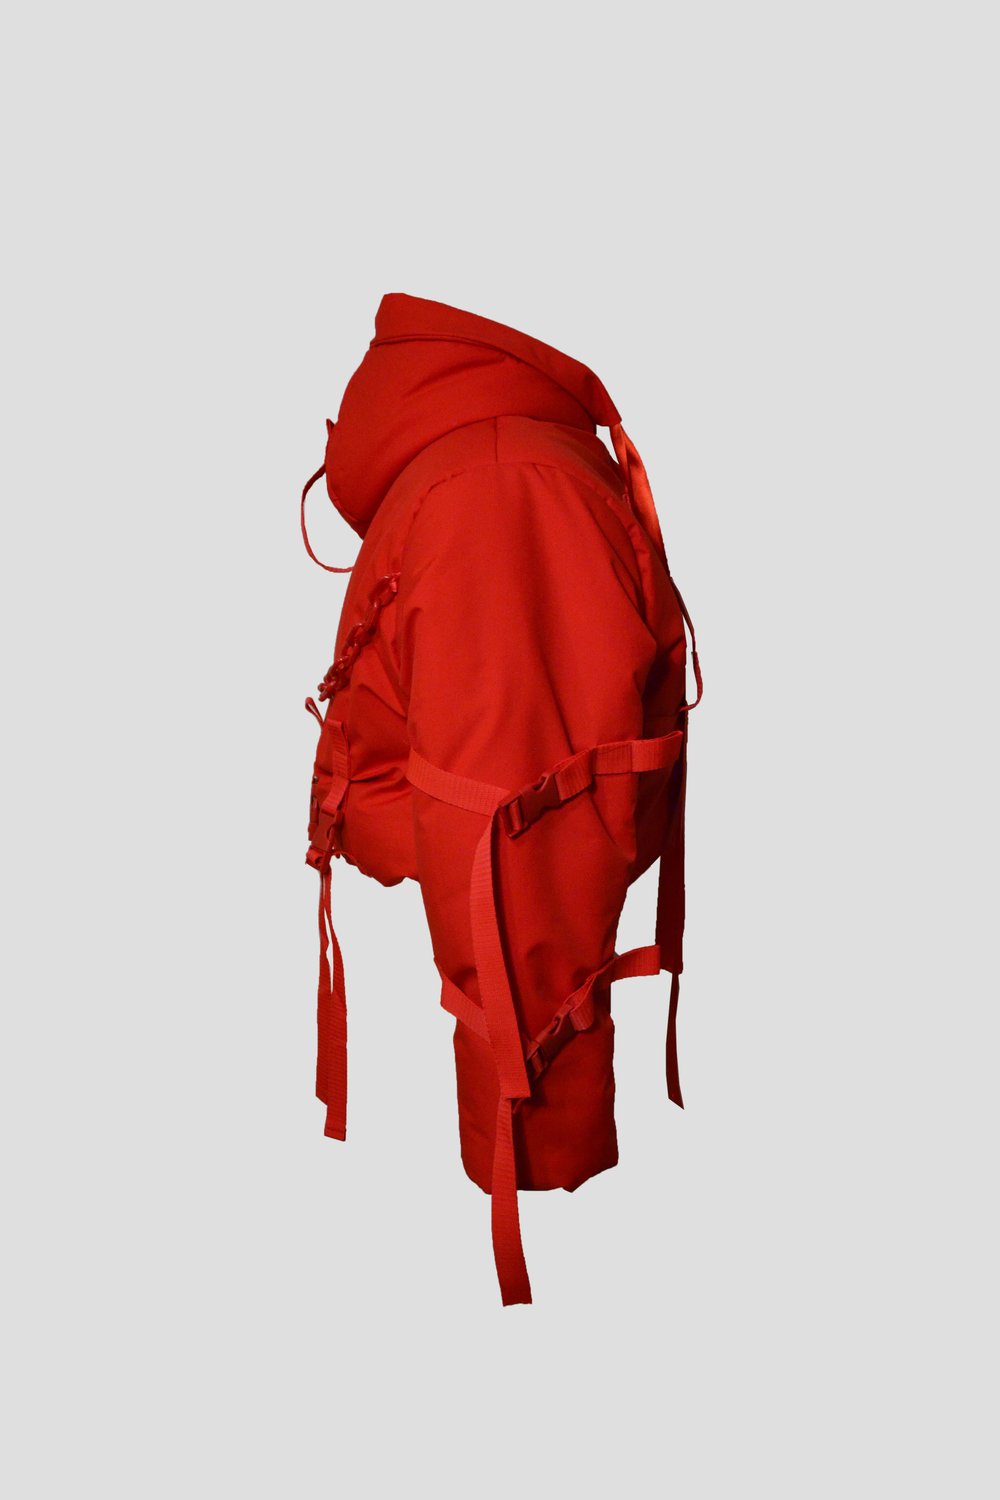 Image of Red puffy jacket